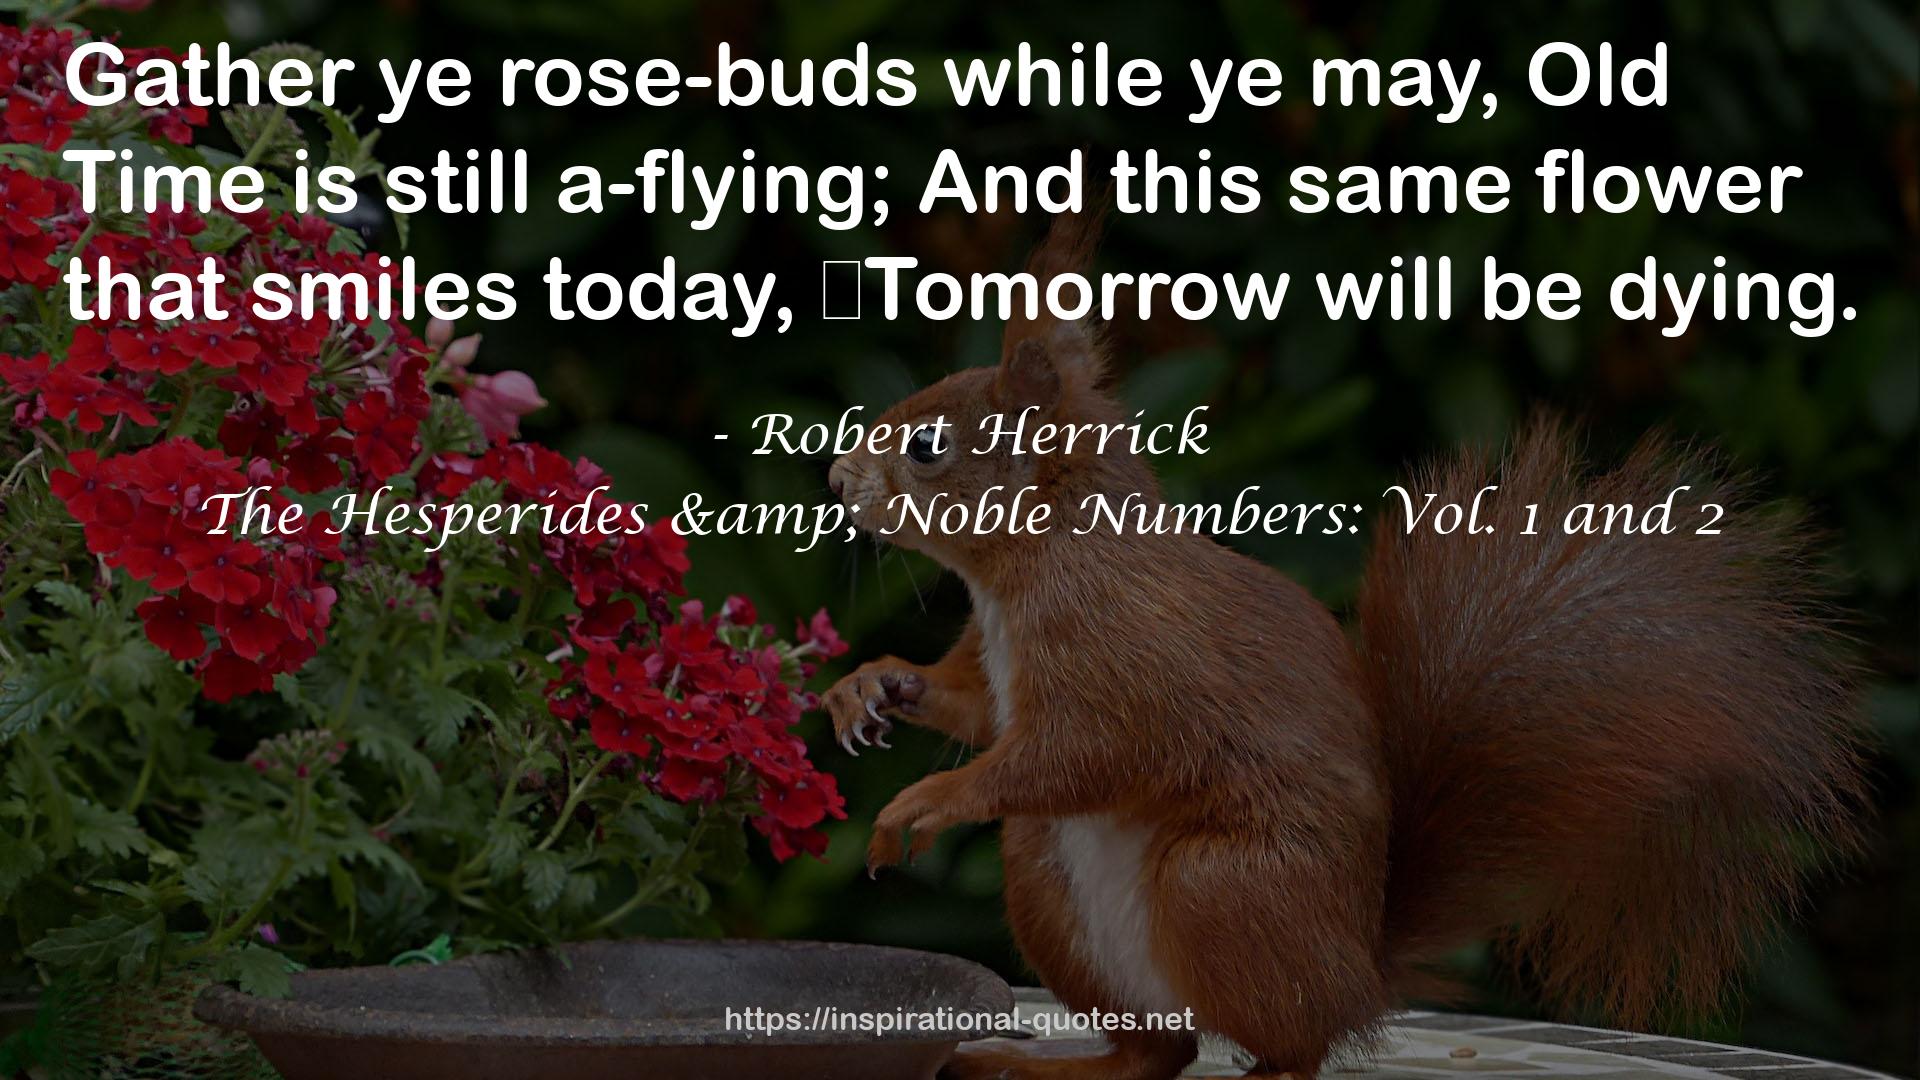 The Hesperides & Noble Numbers: Vol. 1 and 2 QUOTES